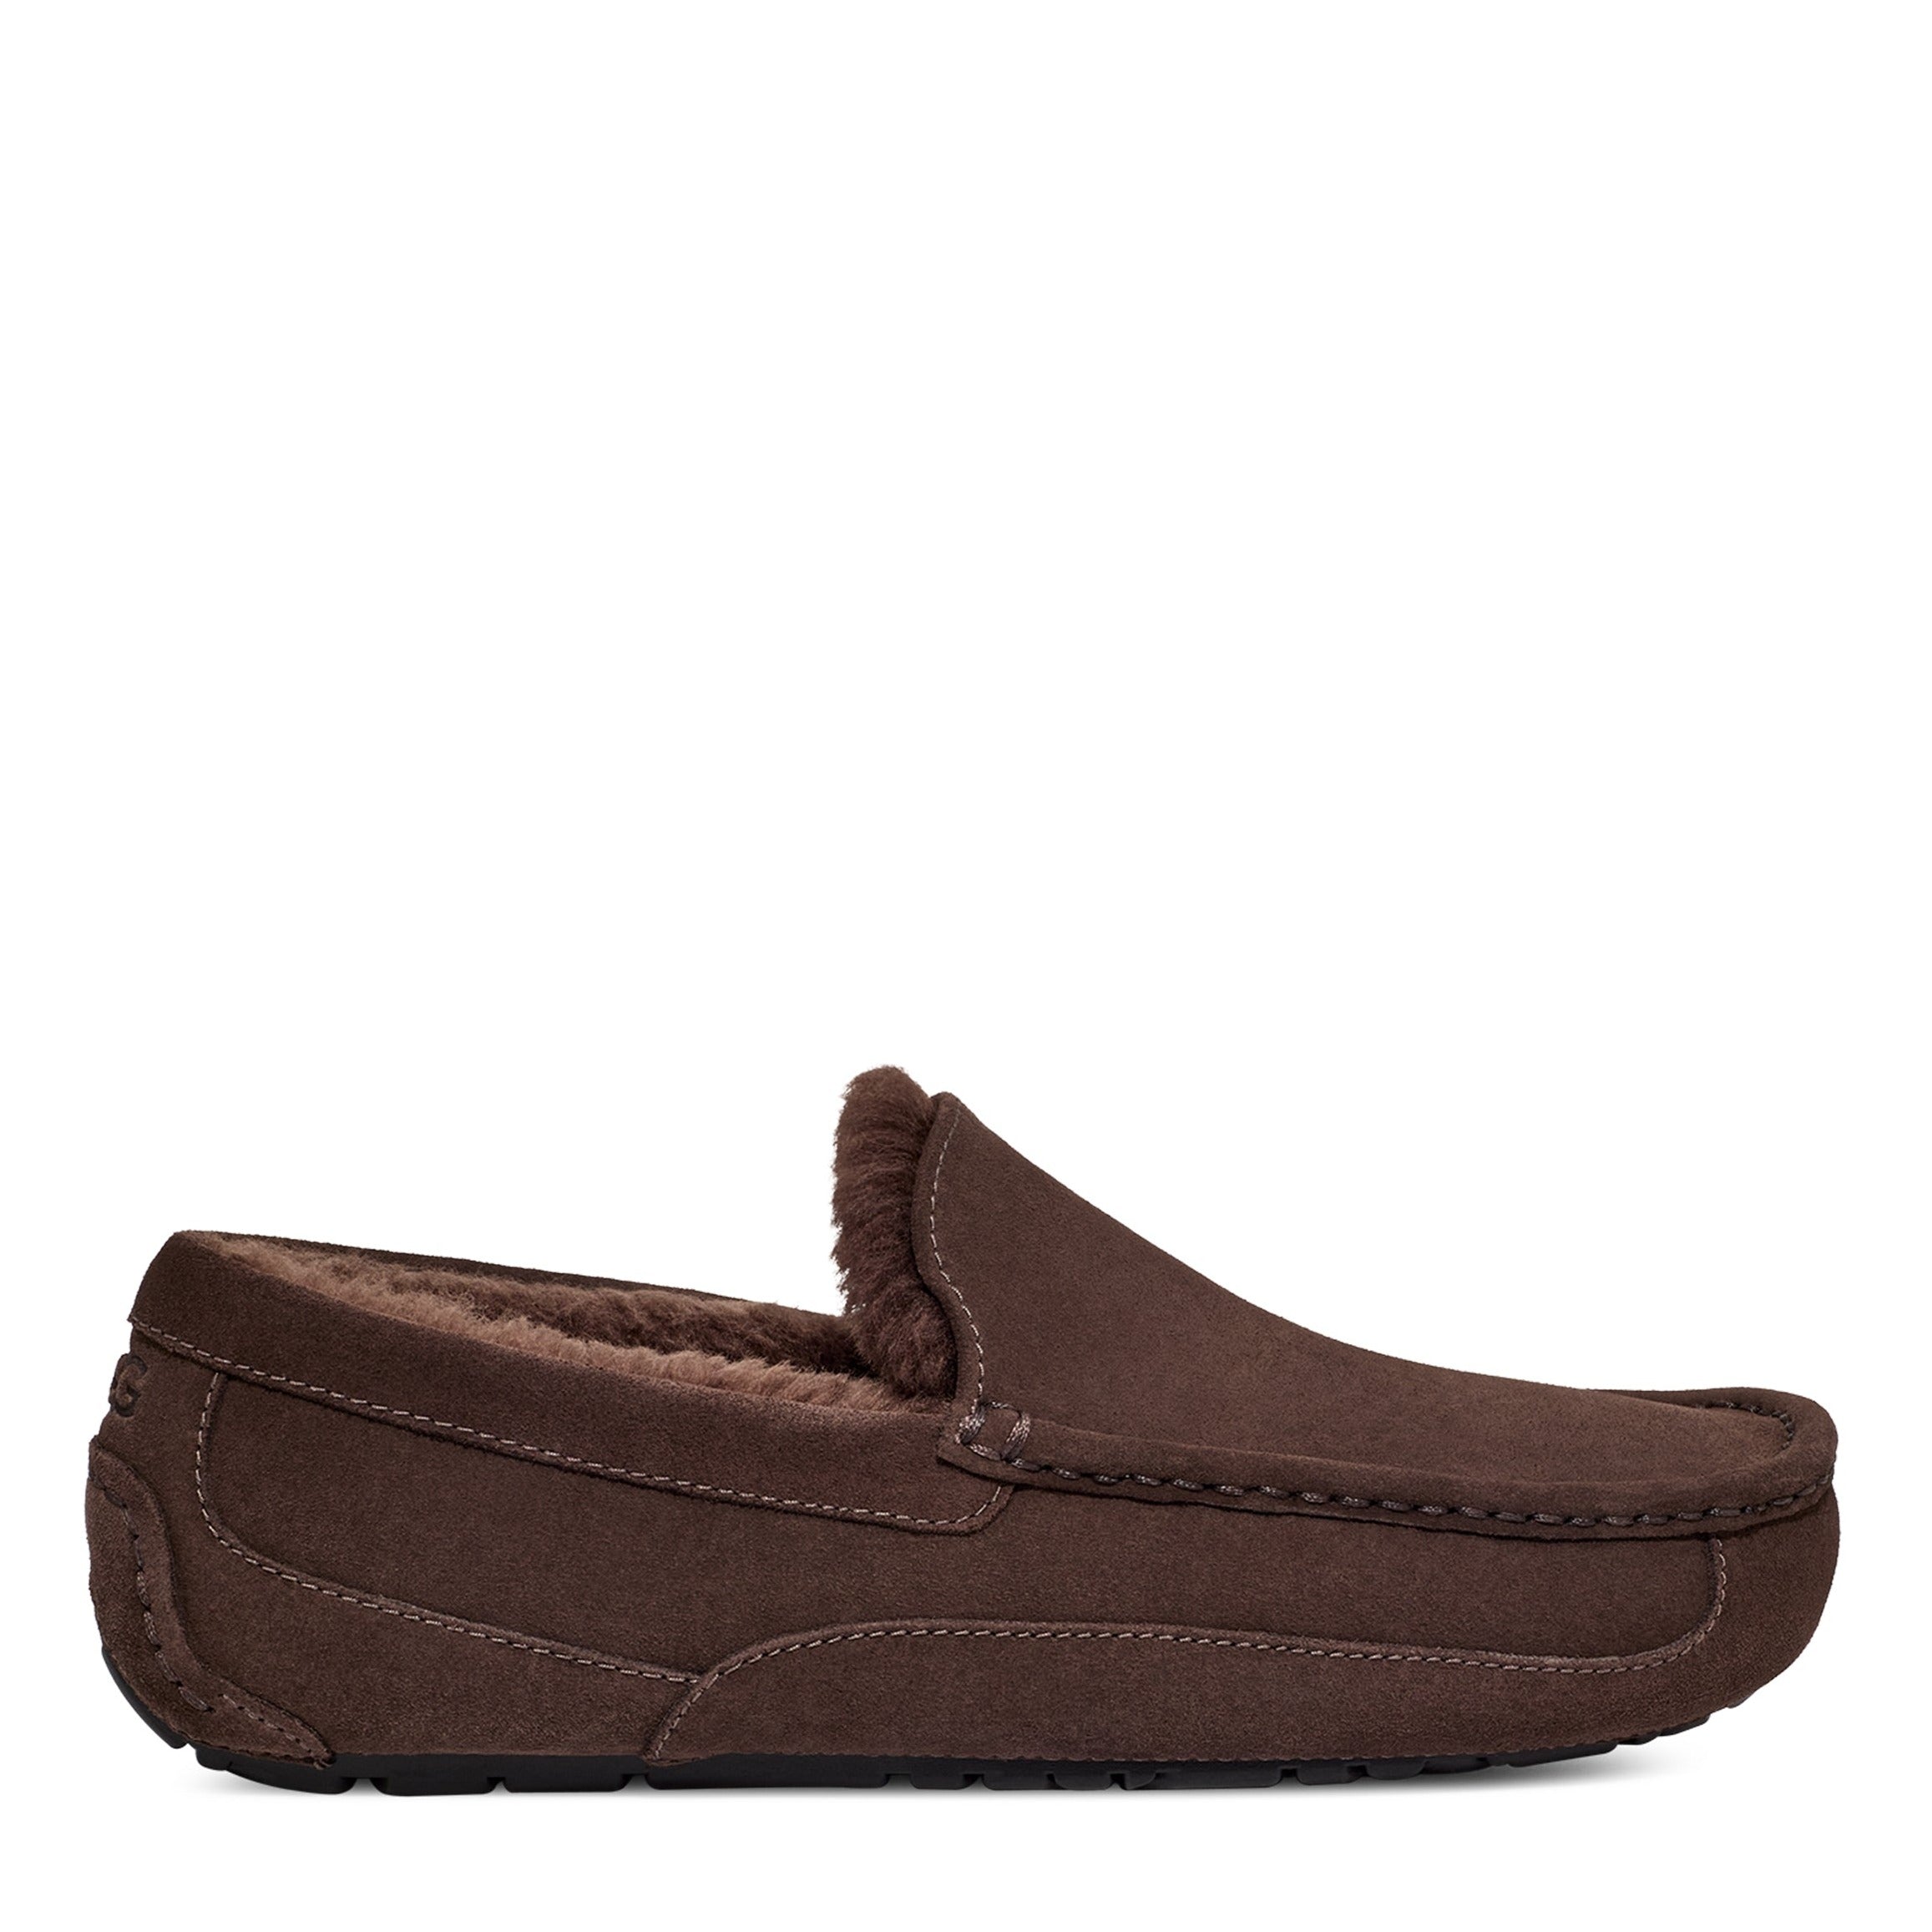 Sample UGG Ascot Loafers & Laceups Dusted Cocoa 8 